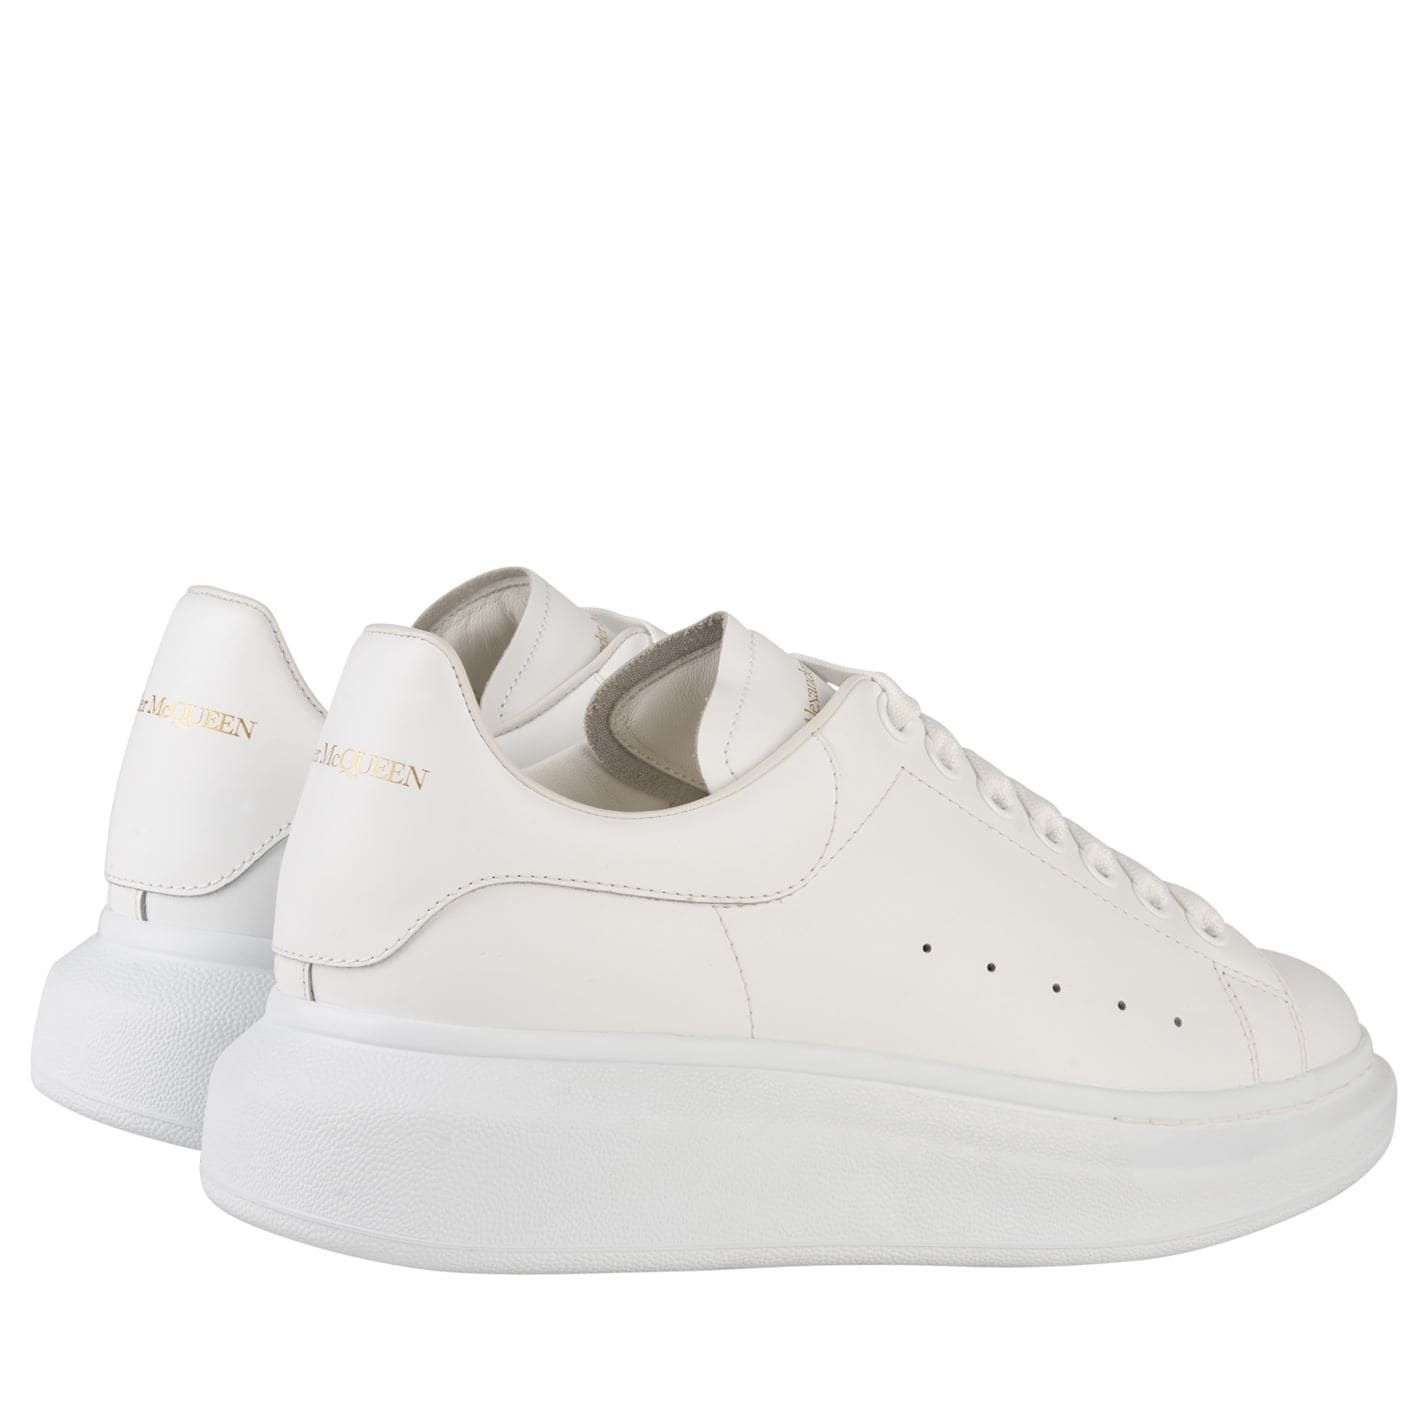 Double Boxed  419.99 Alexander McQueen Oversized White Men's Double Boxed